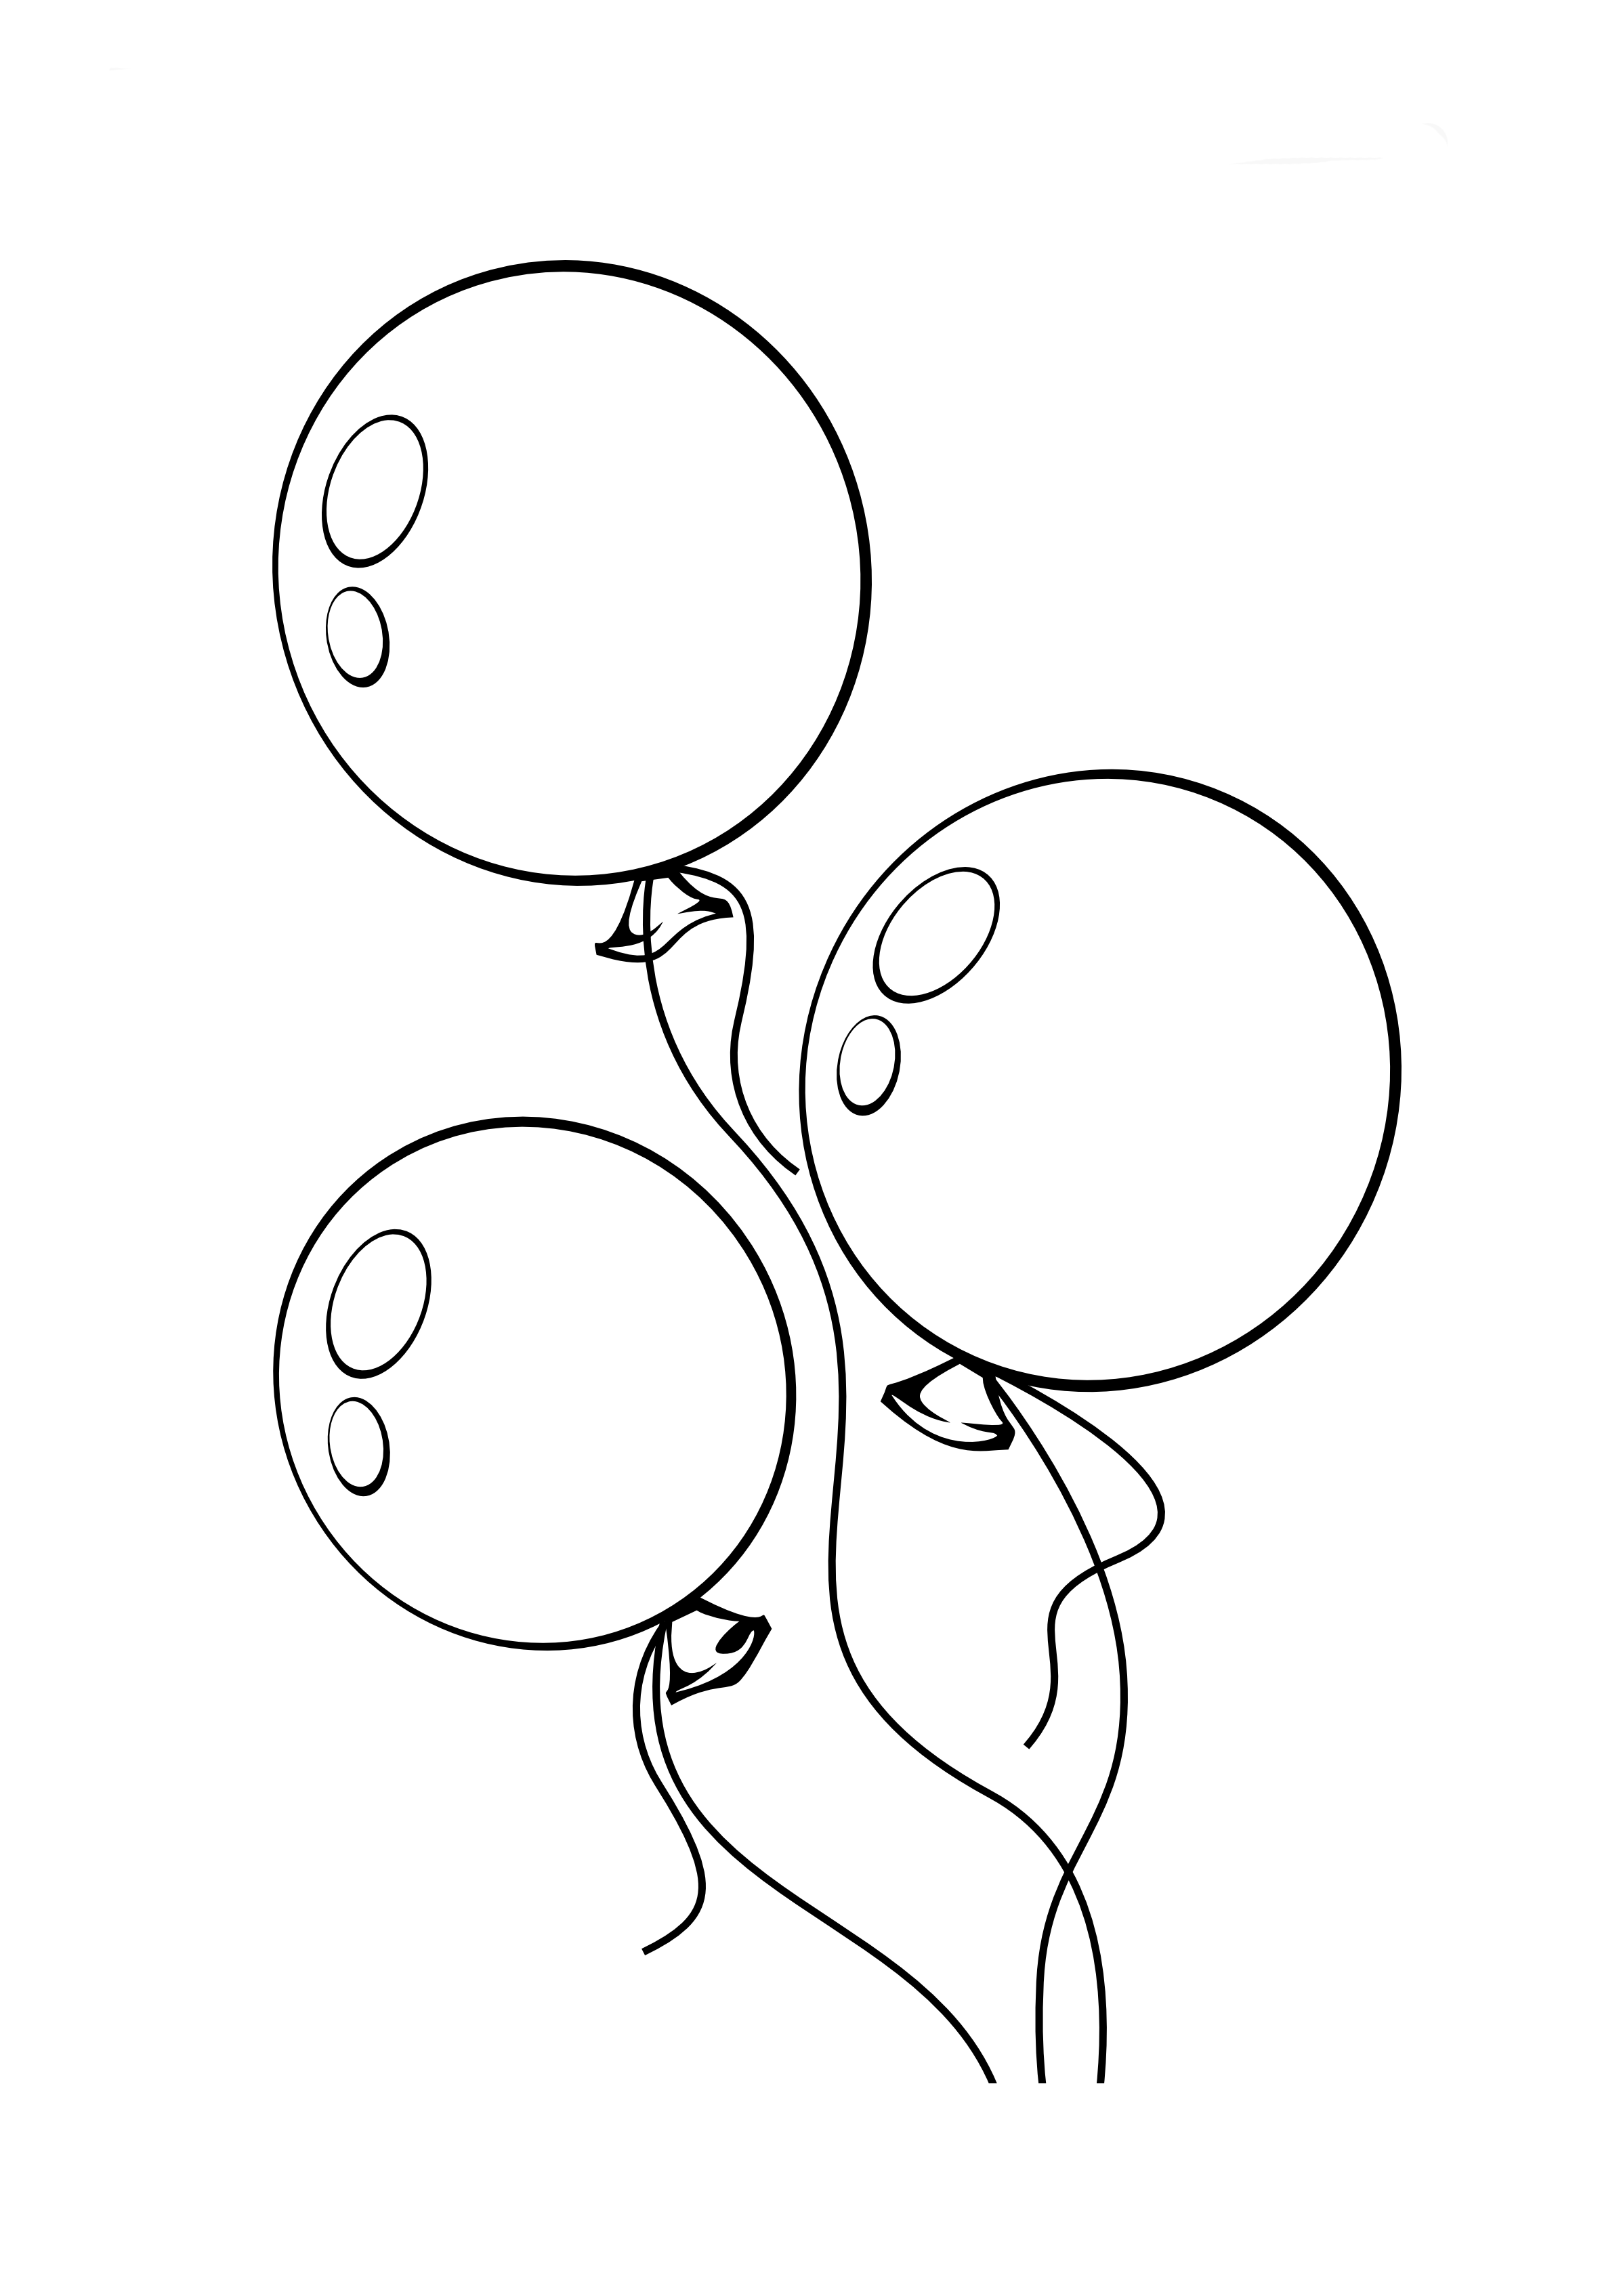 balloon-patterns-coloring-page